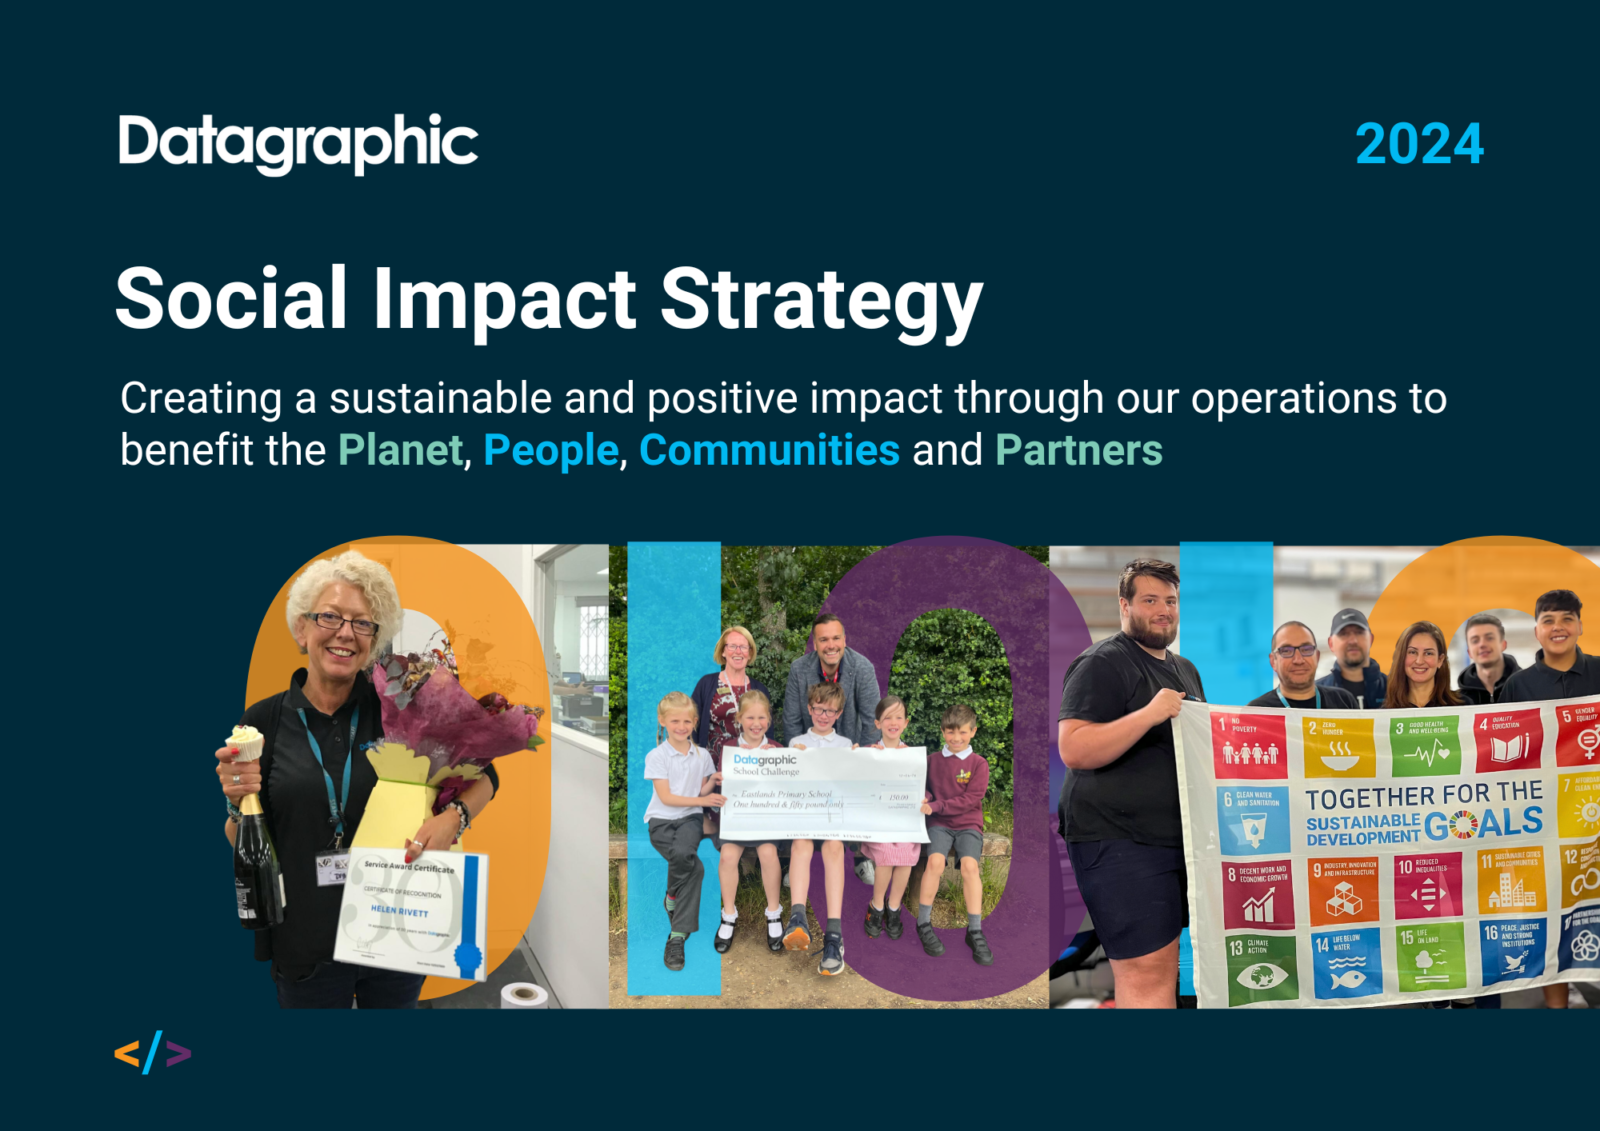 Datagraphic Social Impact Strategy